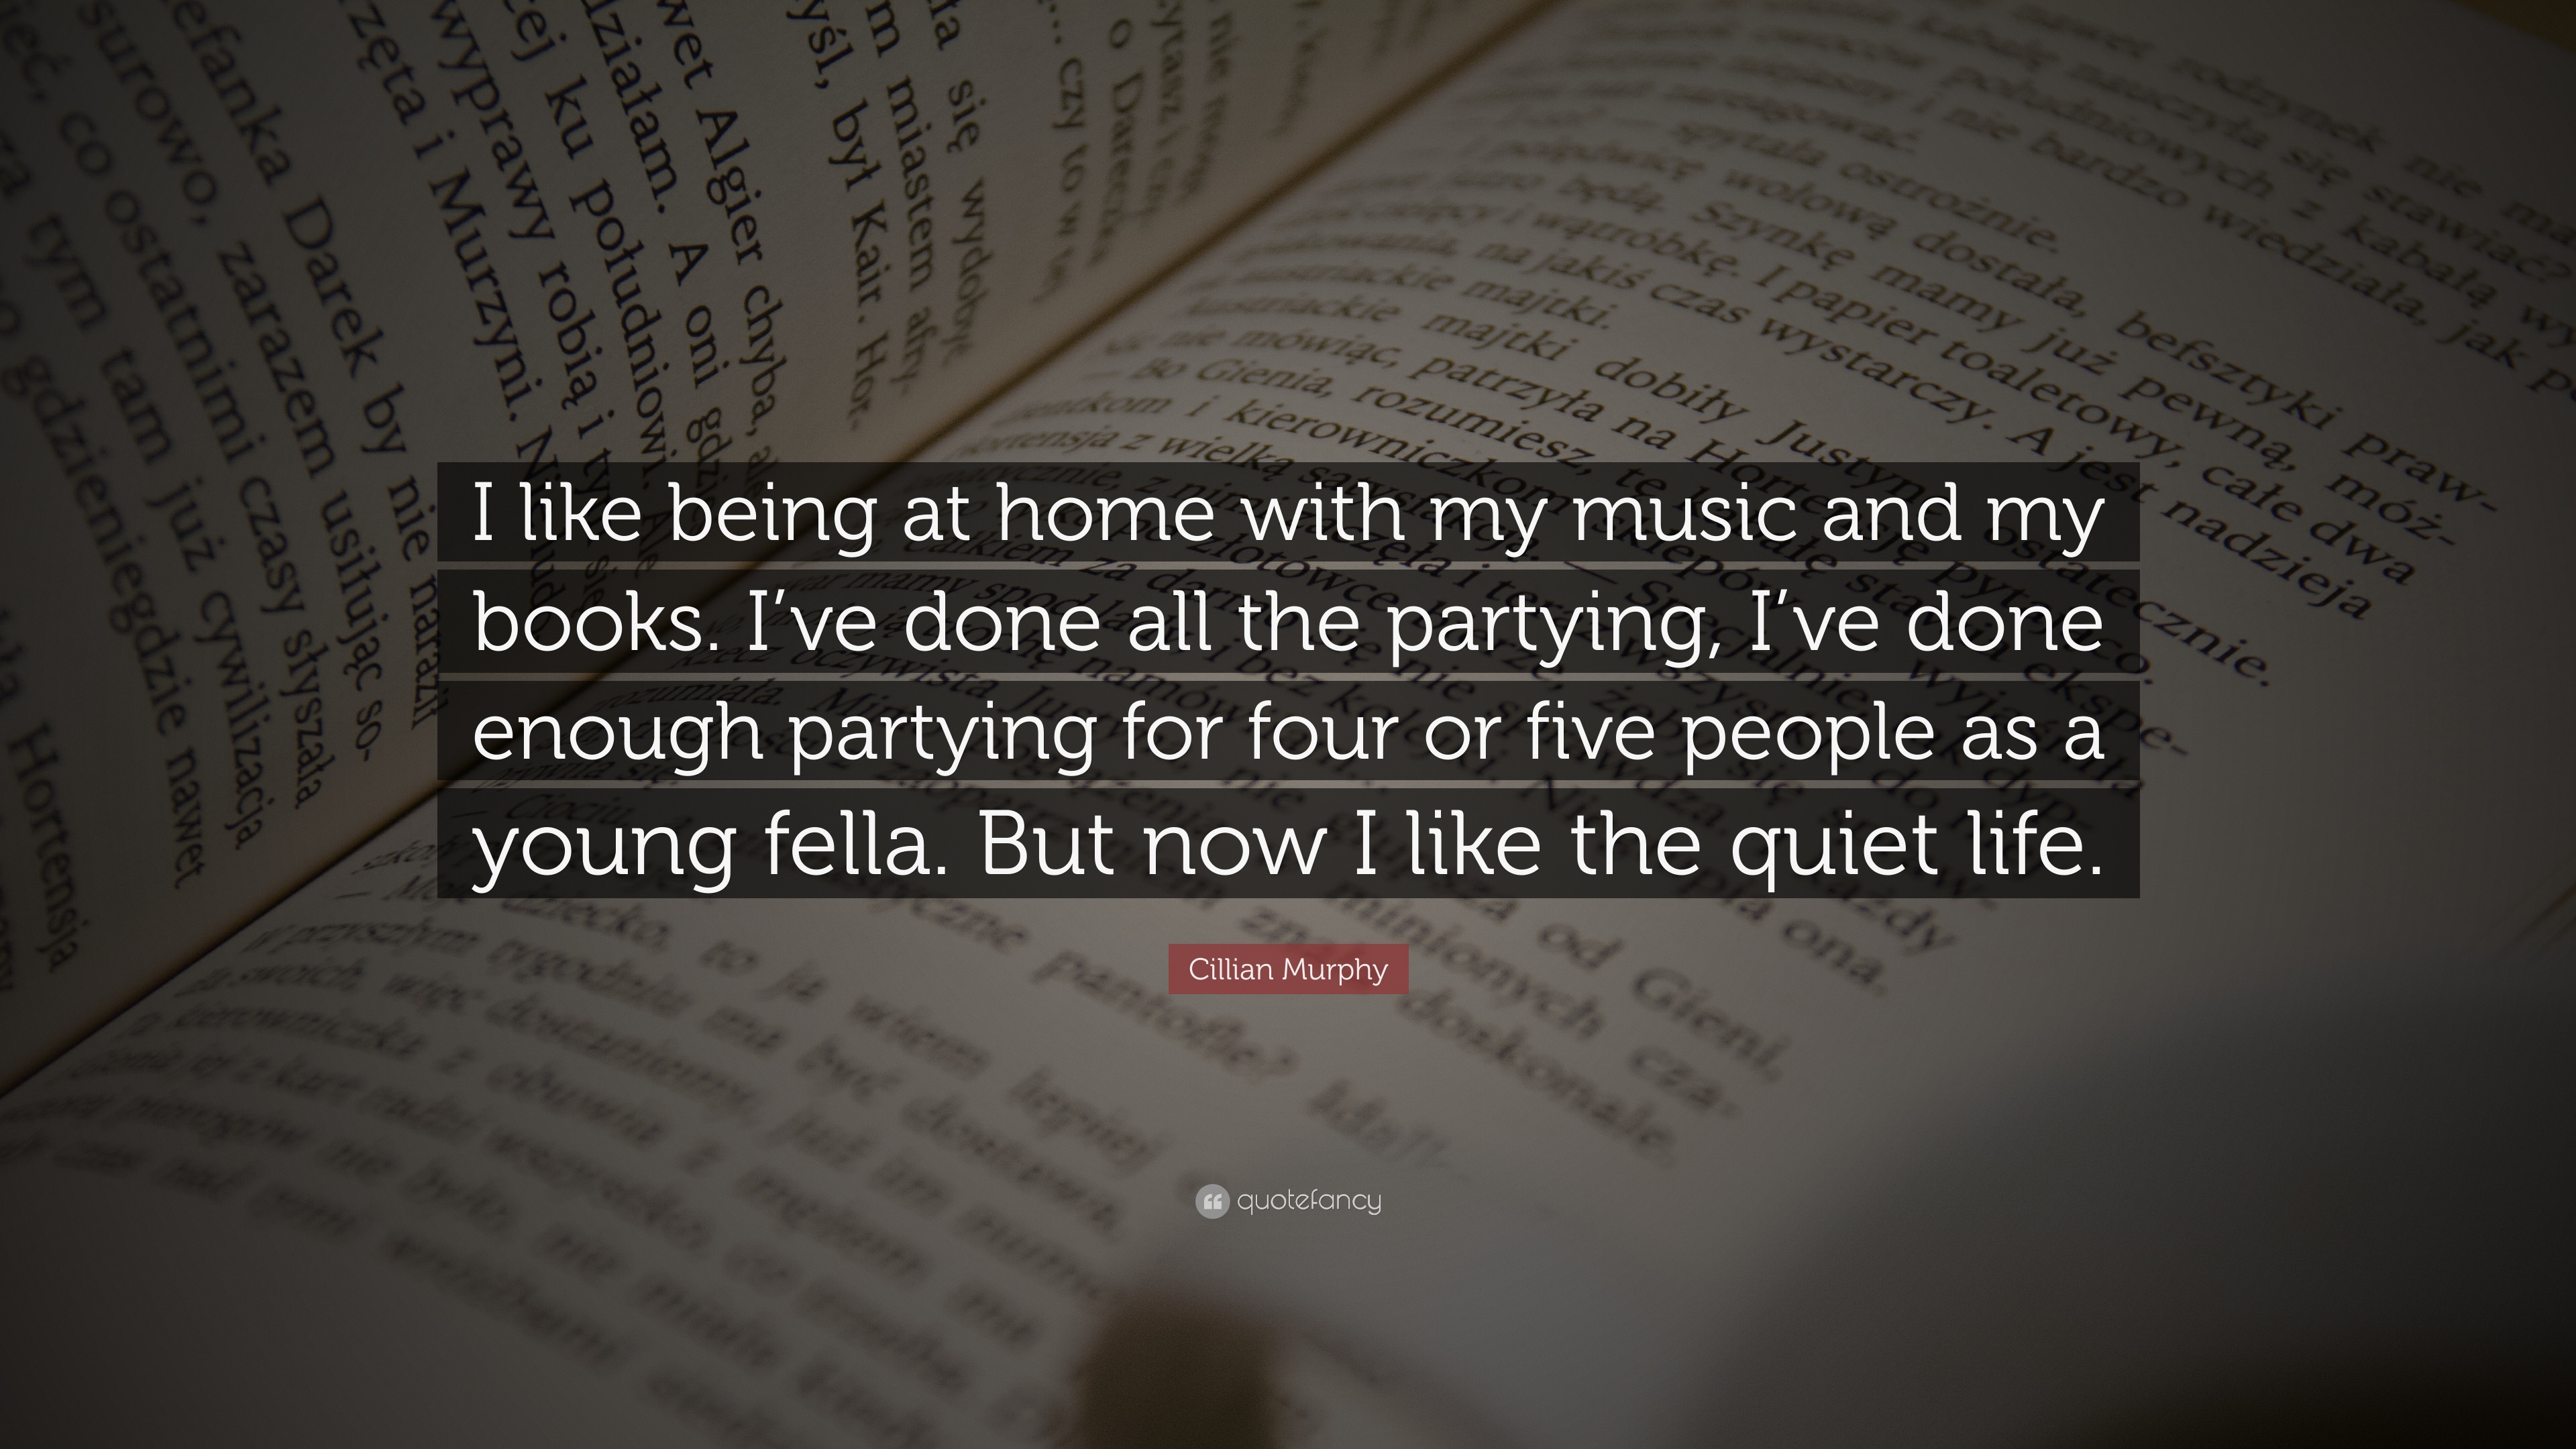 Cillian Murphy Quote: “I like being at home with my music and my ...